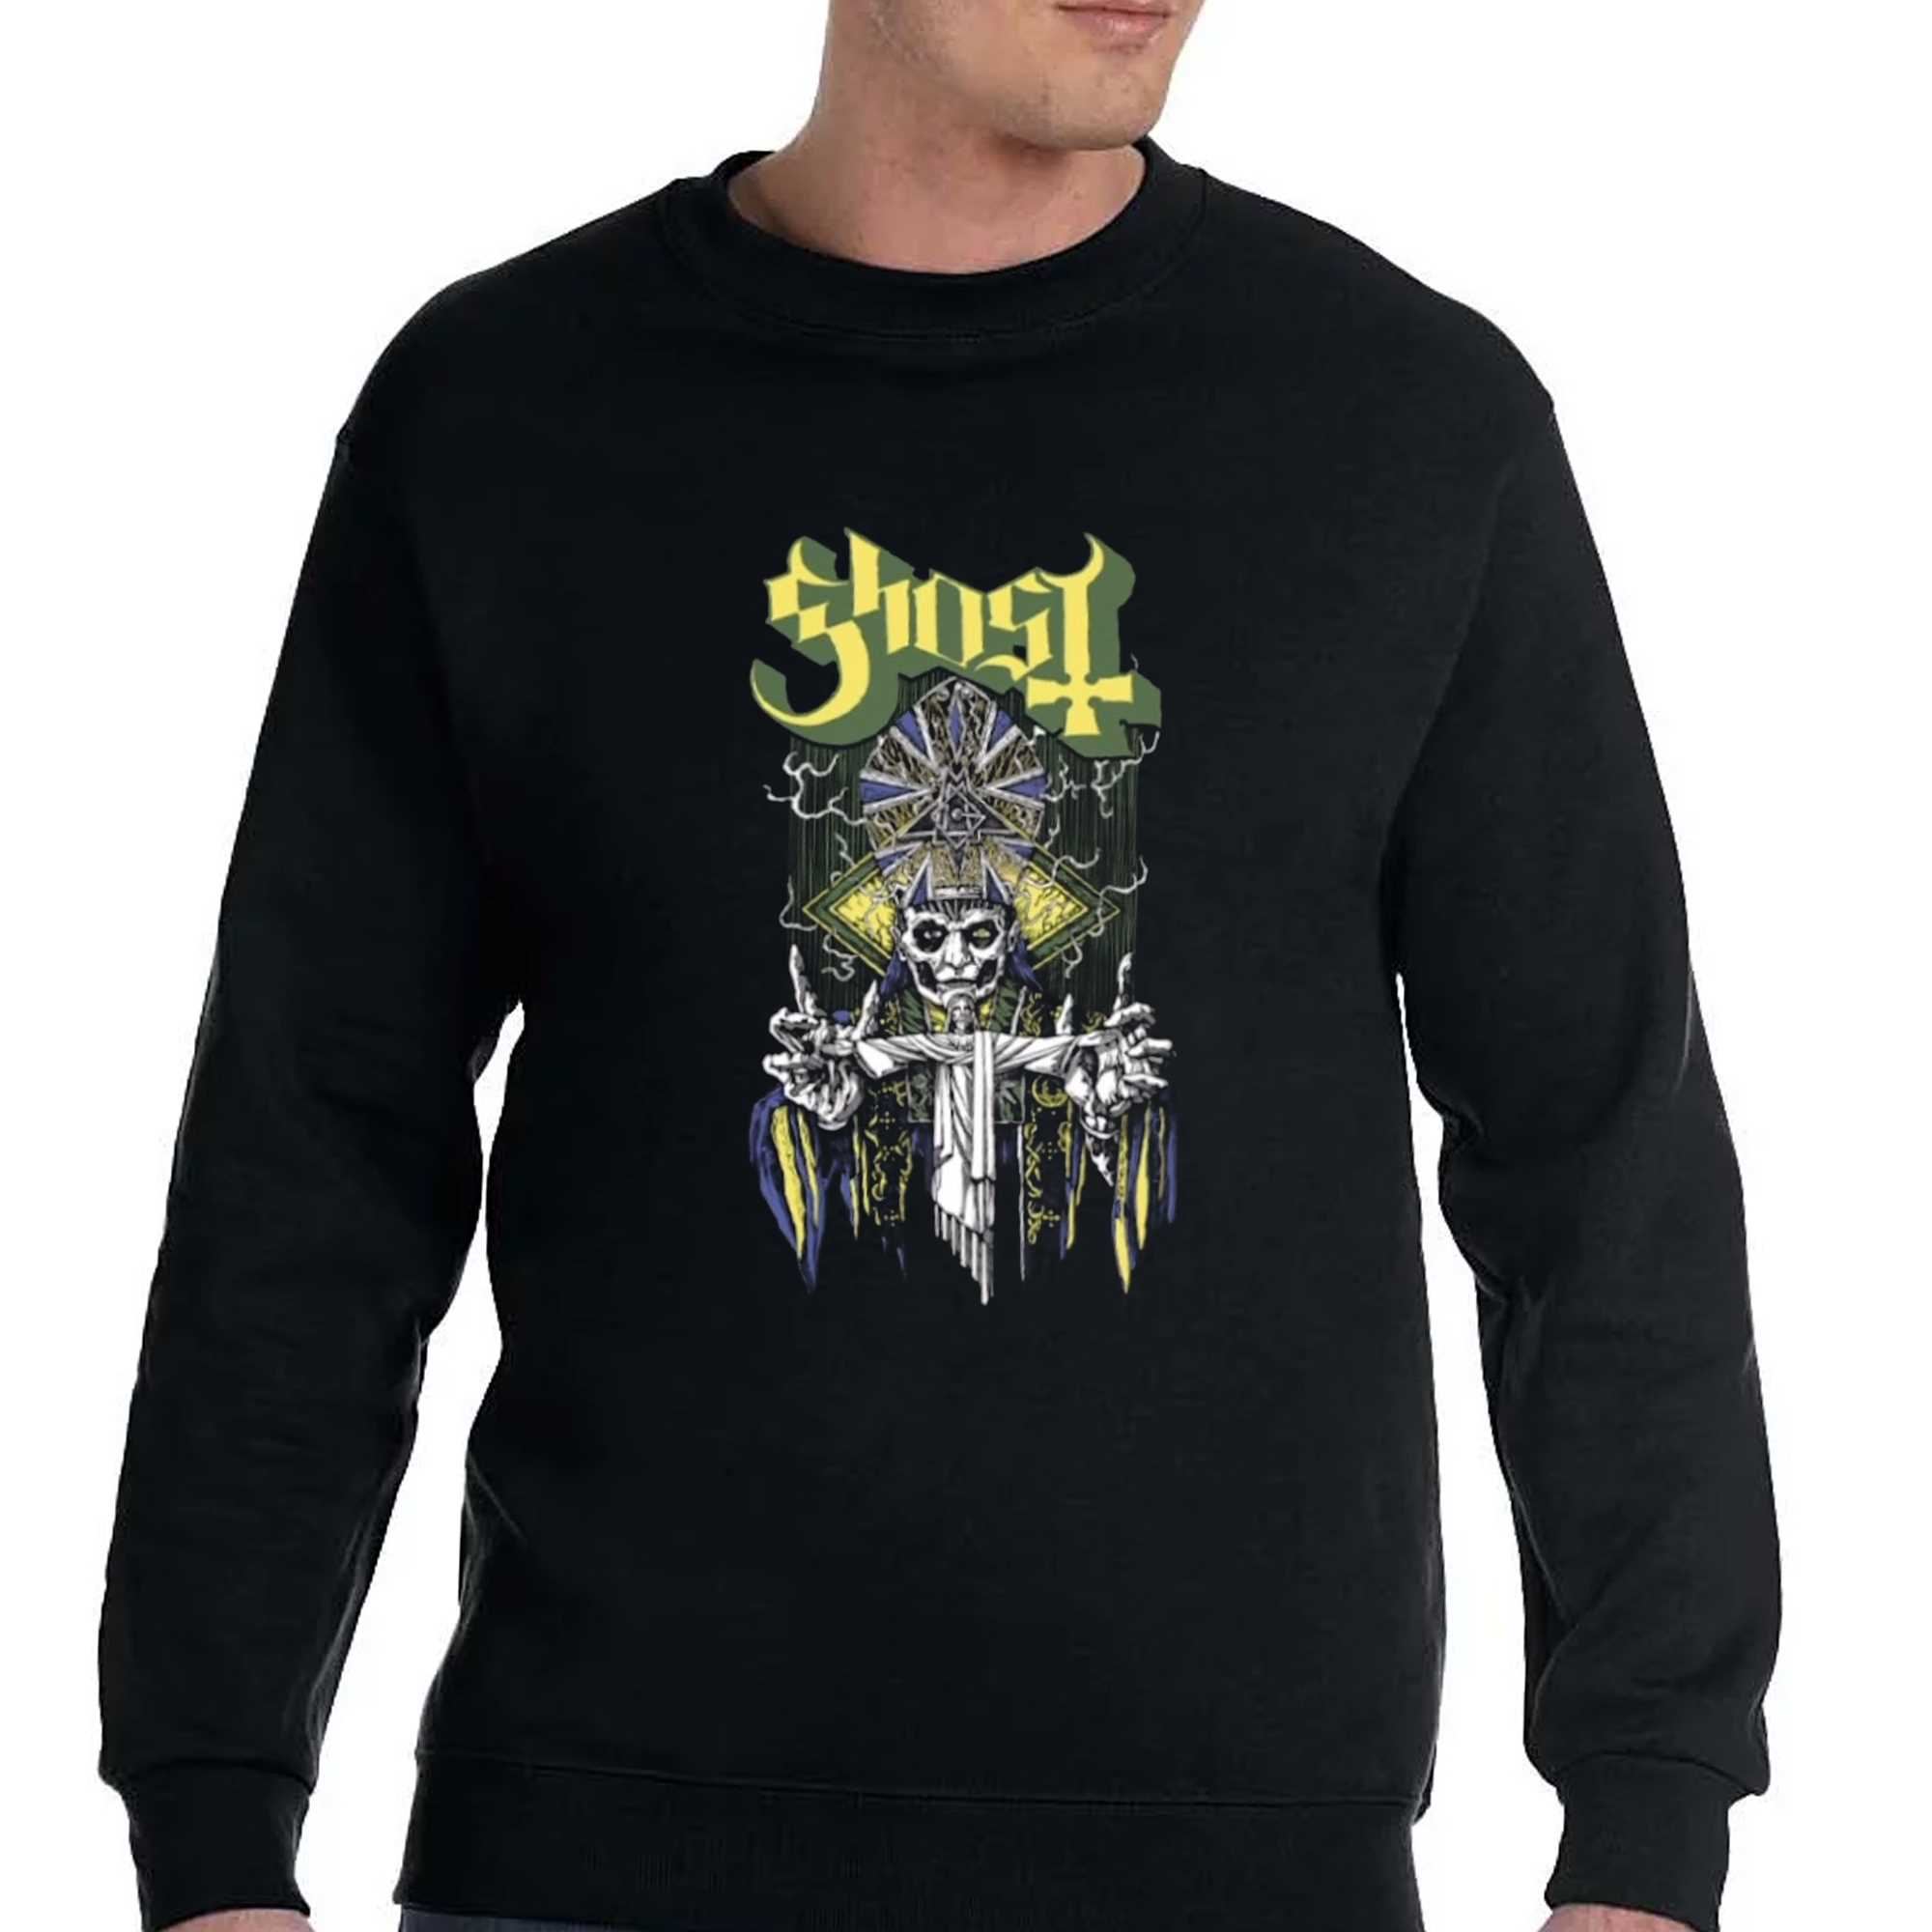 The Brazil Exclusive Ghost Shirt 